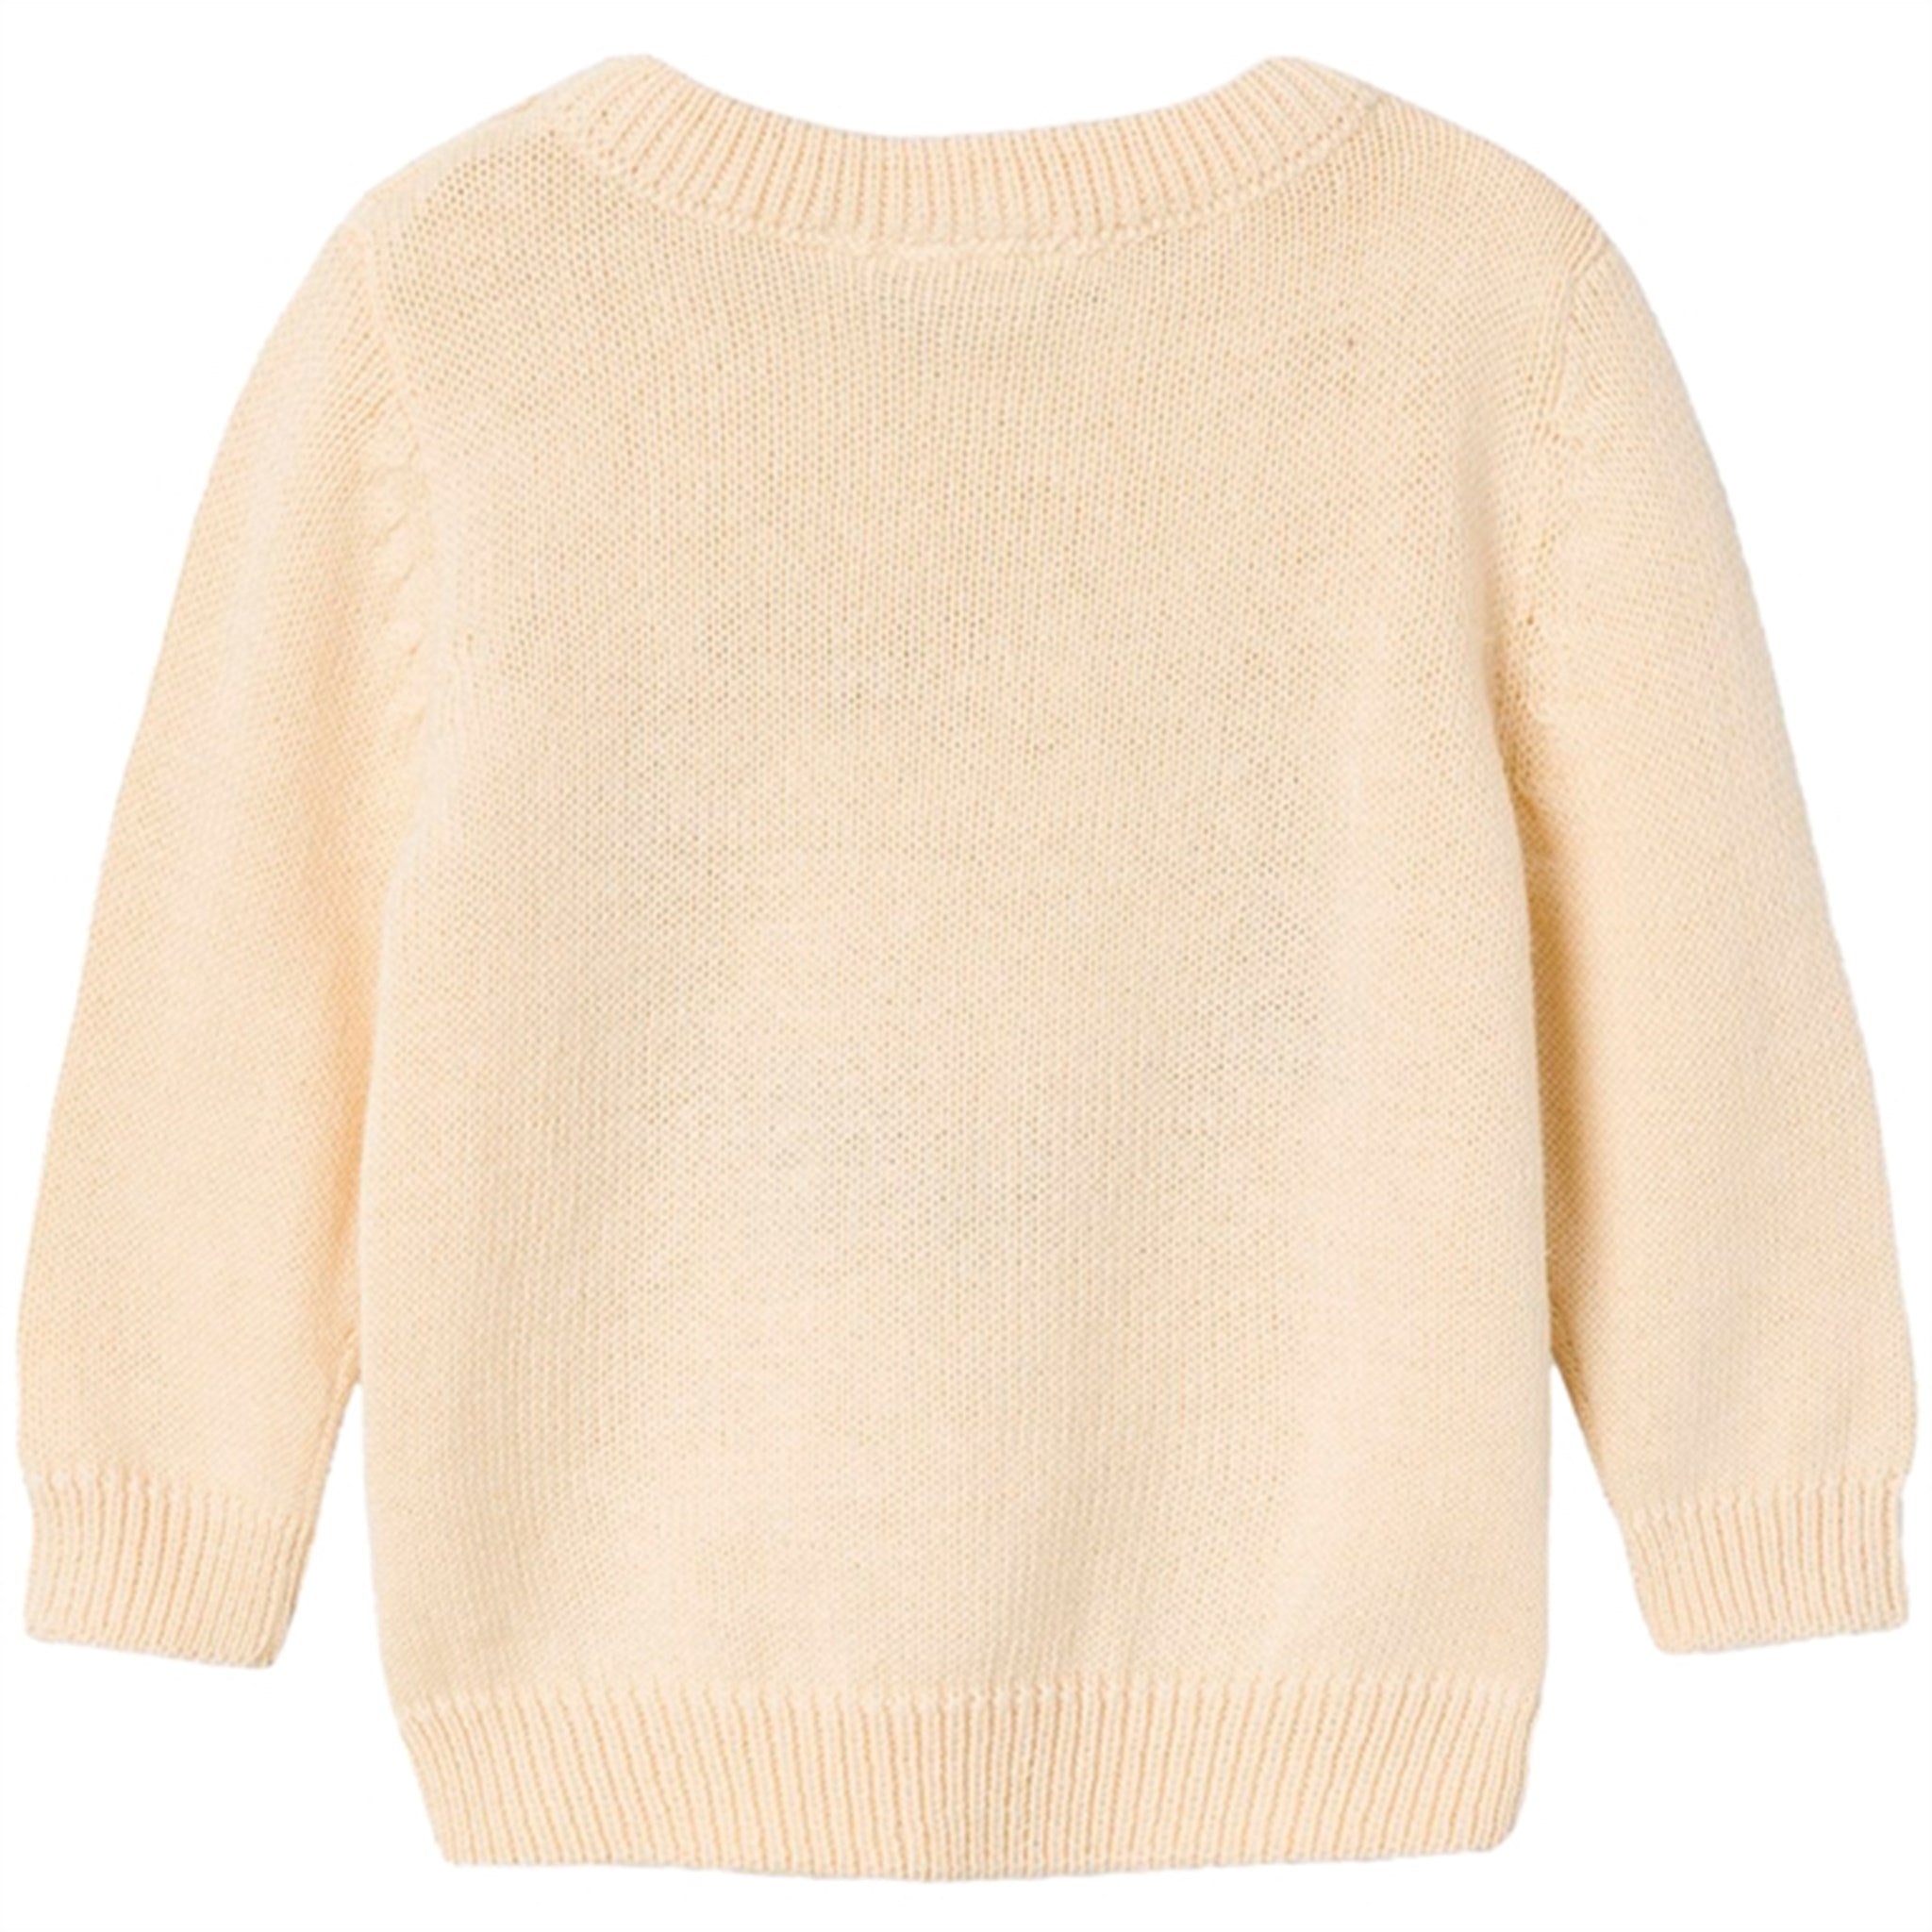 Name it Buttercream Lifine Knit Sweater 2